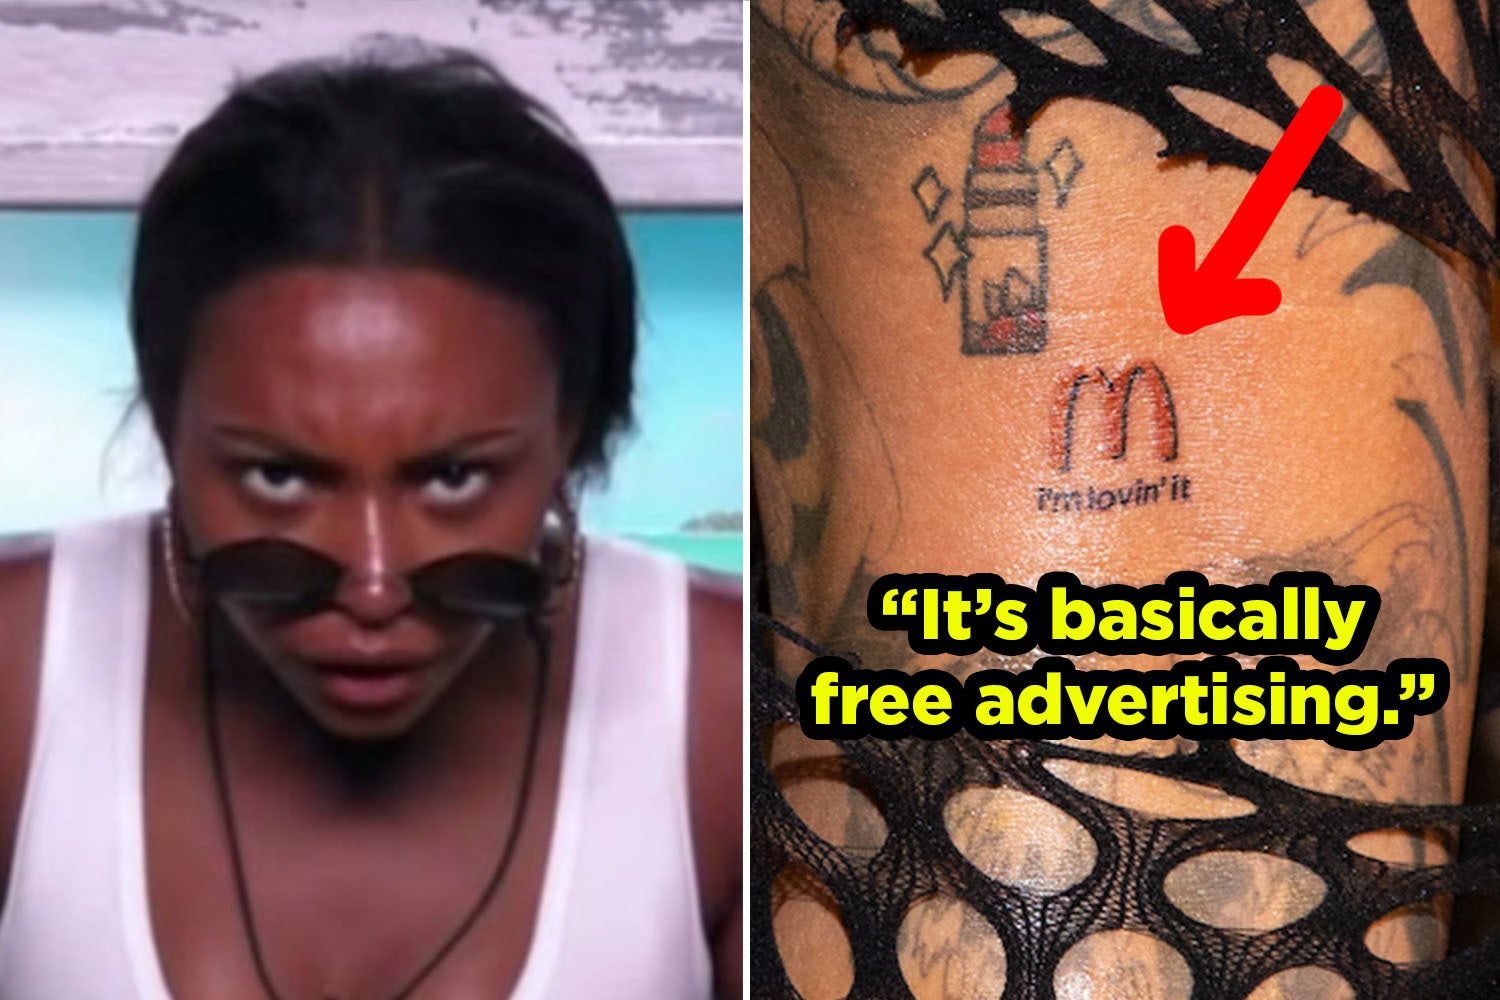 People Are Sharing The Cringiest Tattoos They've Ever Seen In Their Entire Lives, And I Can't Believe Some Of These Actually Exist Out There